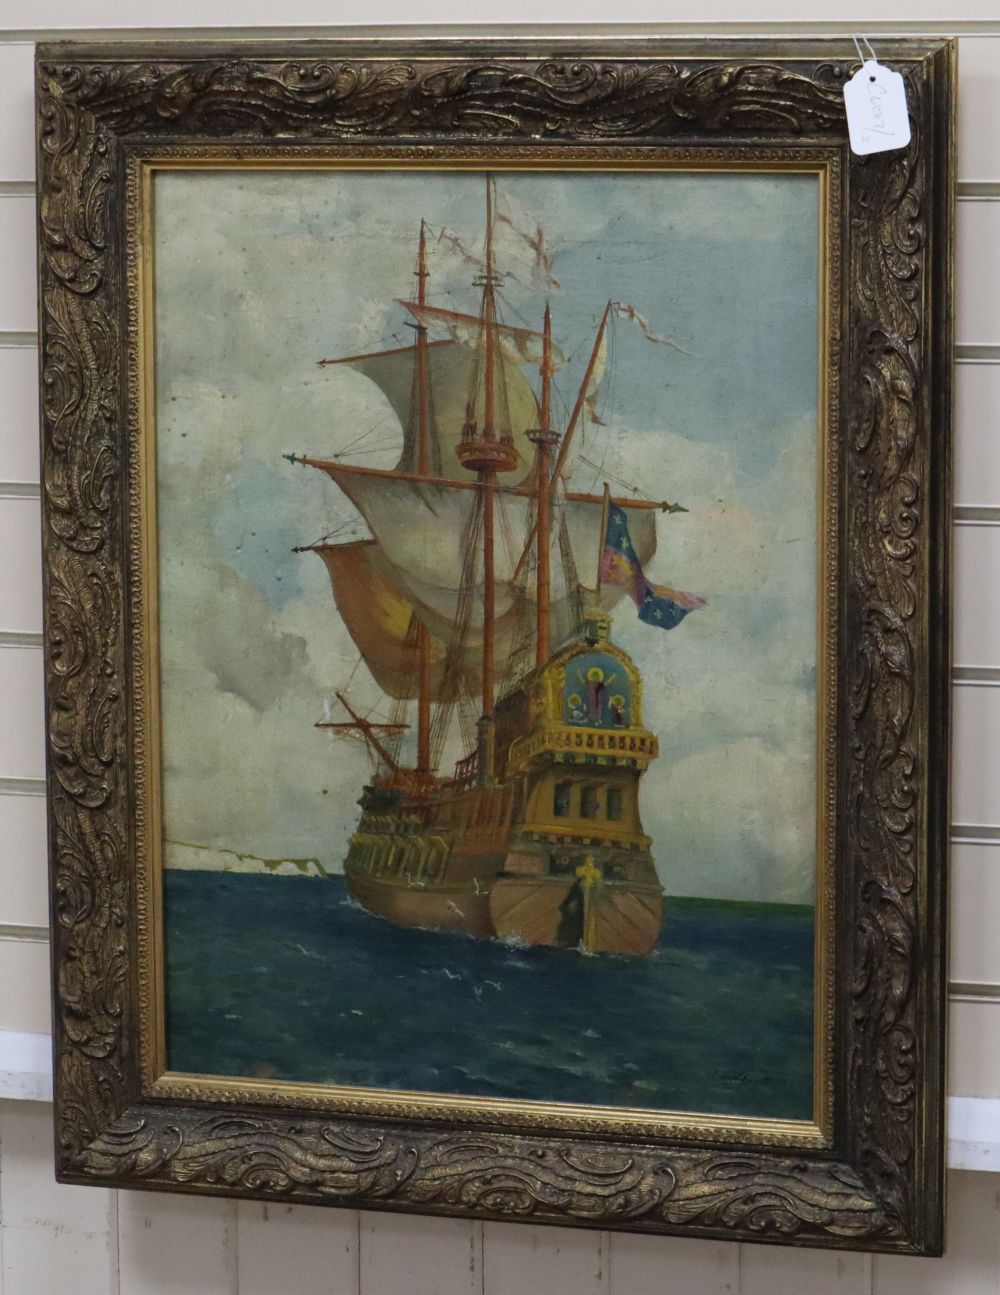 A.E. Lloyd, oil on canvas, Galleon at sea, signed and dated 1951, 59 x 44cm